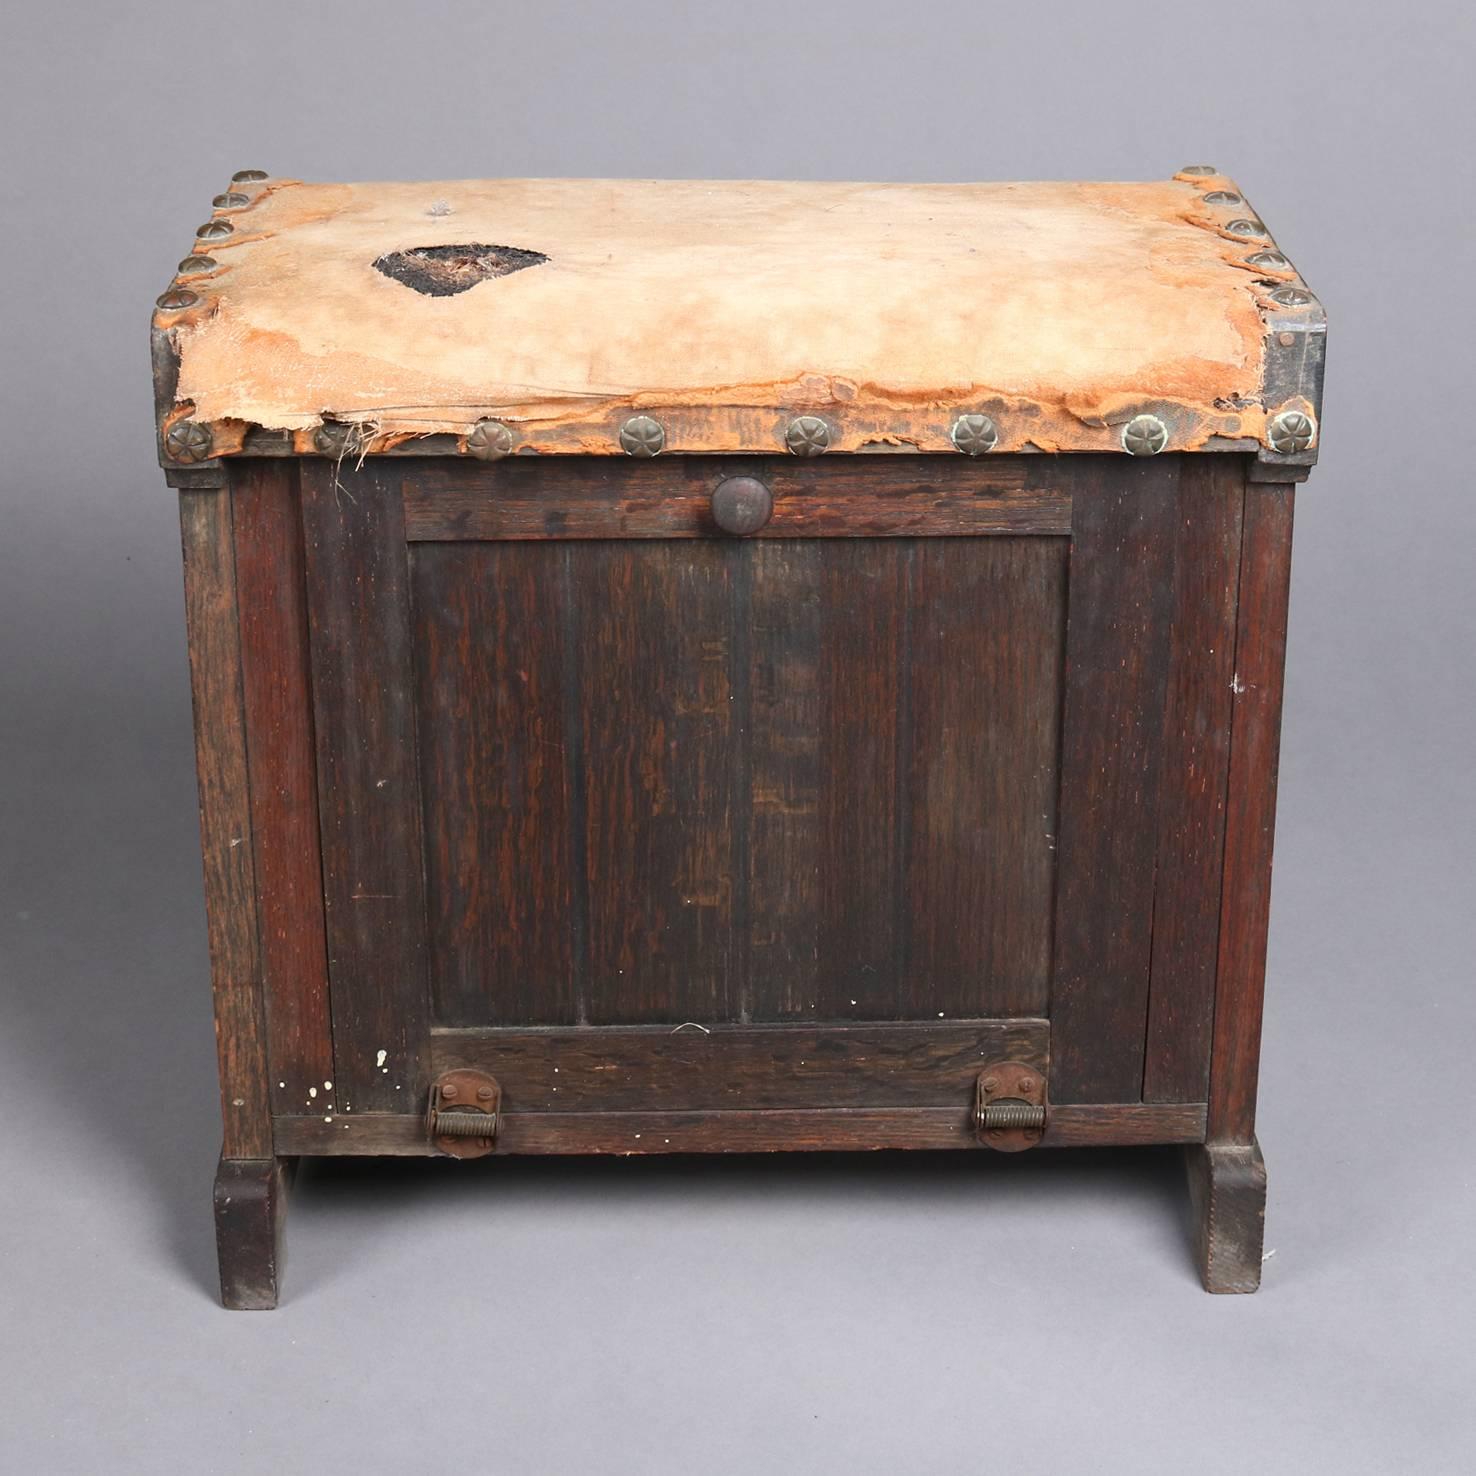 Early Primitive Arts & Crafts style antique shoe shine box and stool features grain painted wood construction with drop front door opening to interior storage compartment and upholstered seat, early 20th century

Measures - 16" H x